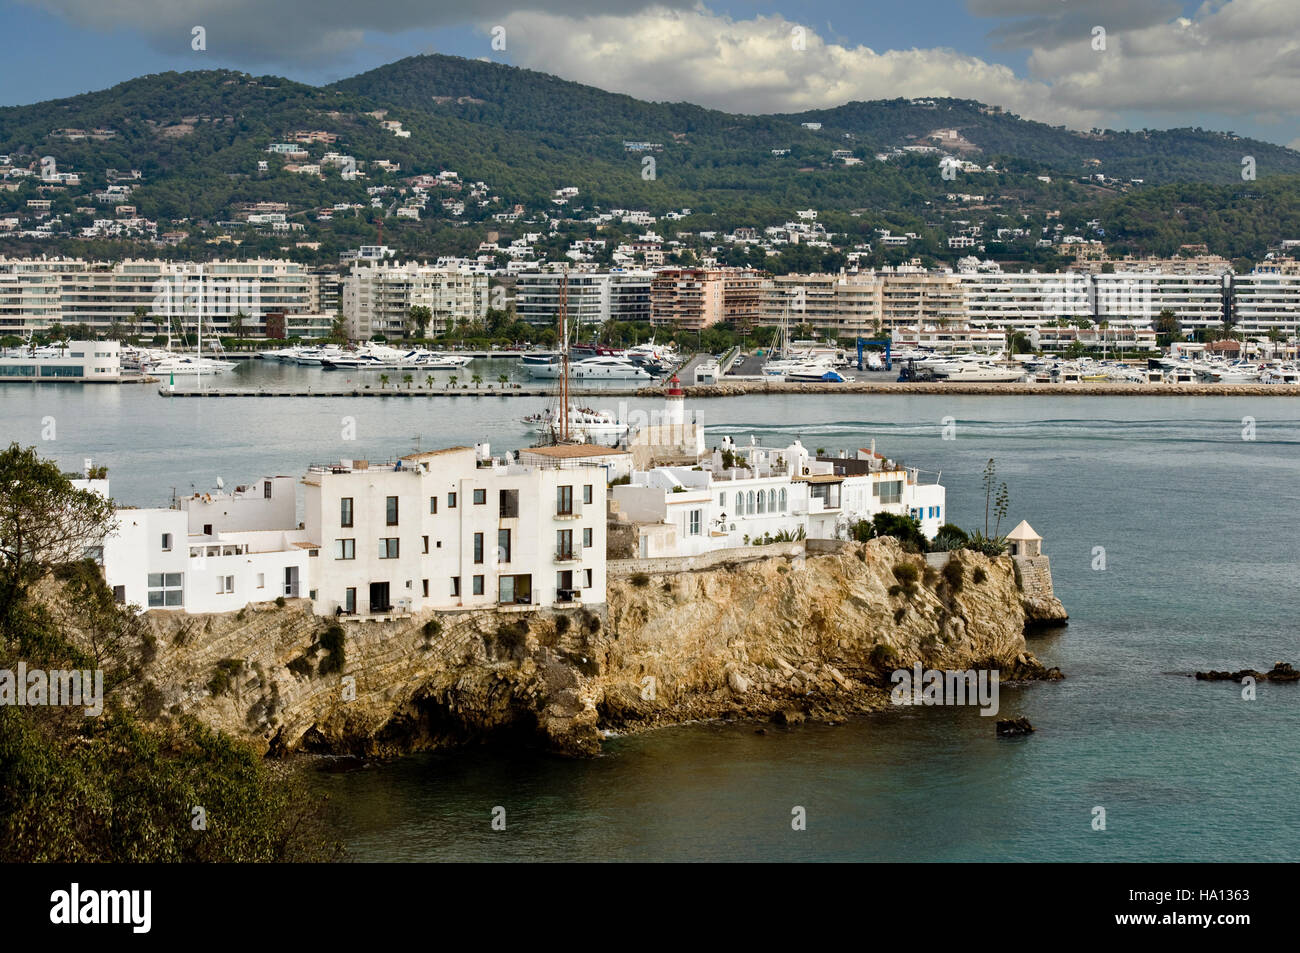 Panoramic view of the old city of Eivissa (Ibiza) in the background with the new city Stock Photo